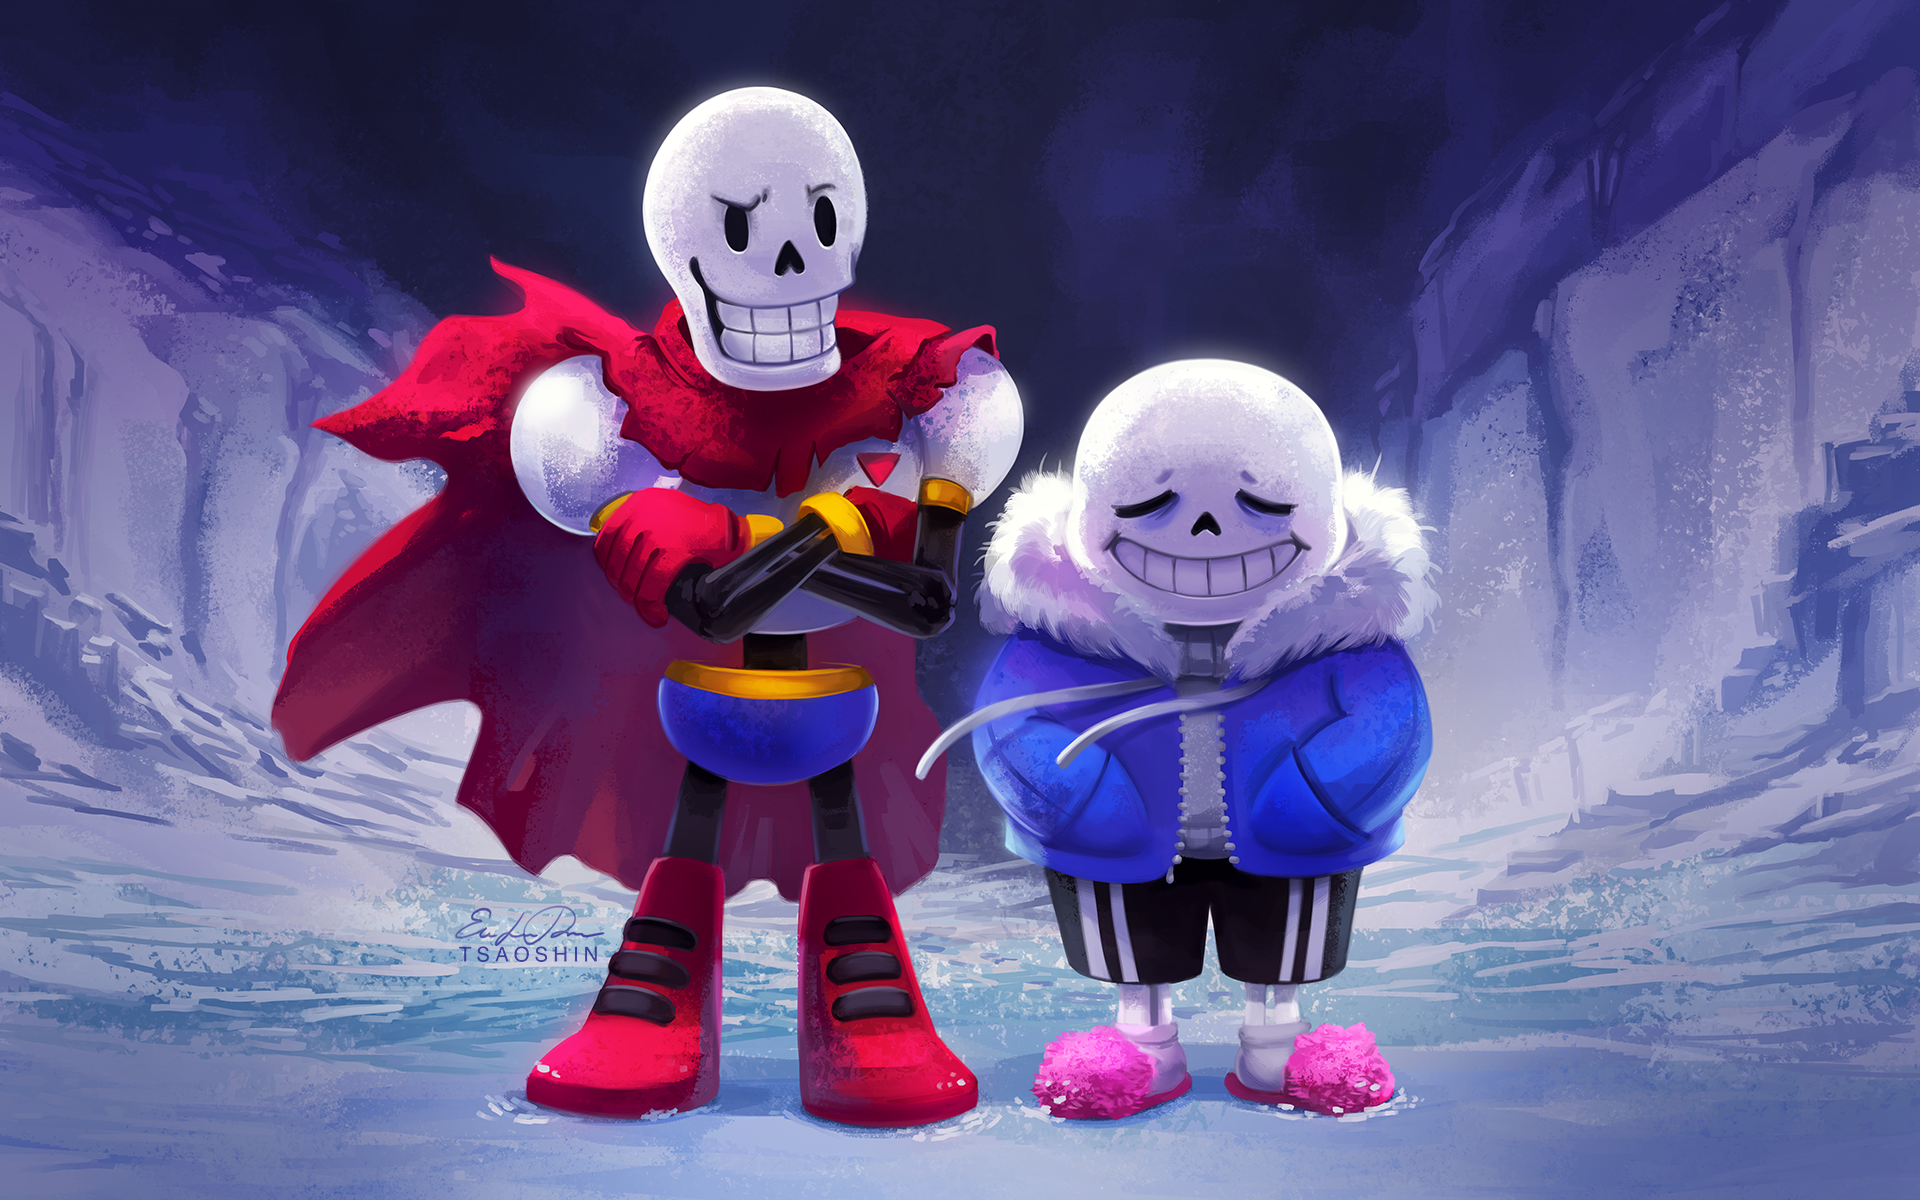 Papyrus and Sans by Eric Proctor